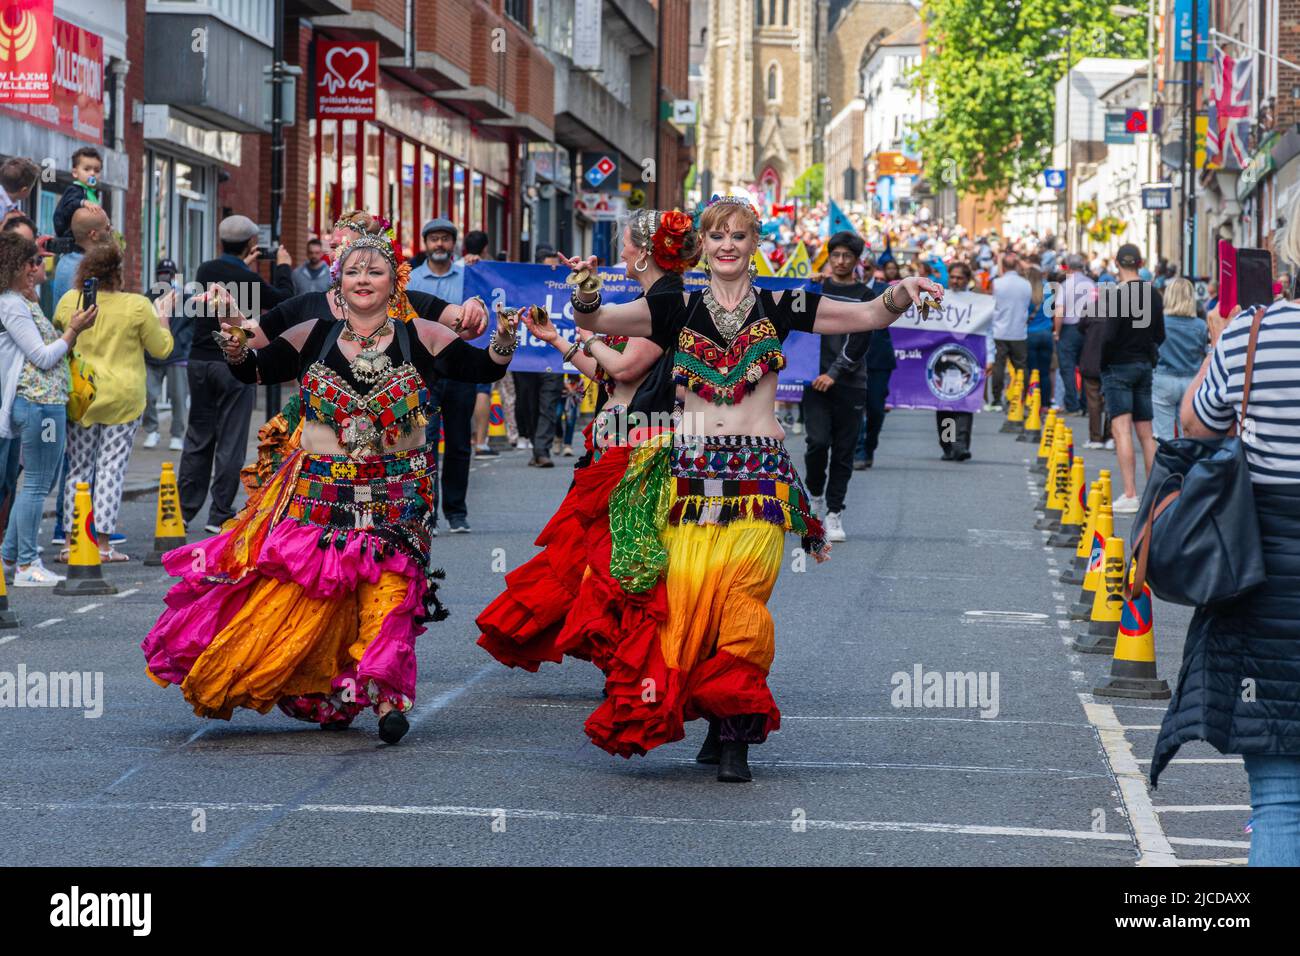 Belly dancers in colourful costumes taking part in the Grand Parade at Victoria Day, an annual event in Aldershot, Hampshire, England, UK Stock Photo